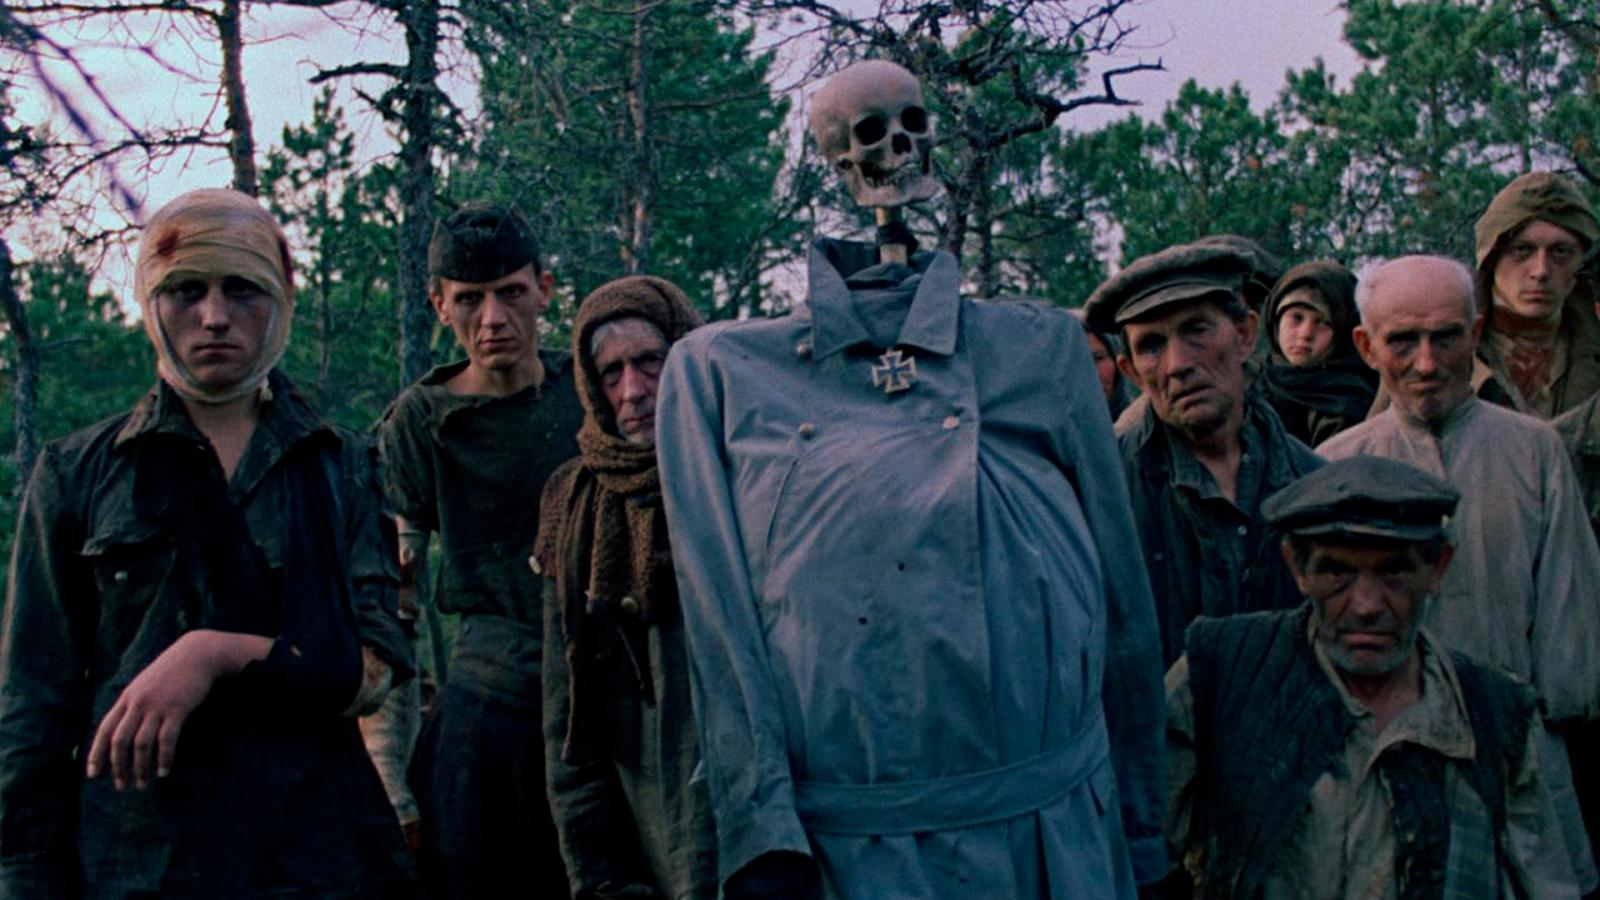 5 War Movies You Can Only Watch Once Because of How Disturbing They Are - image 2